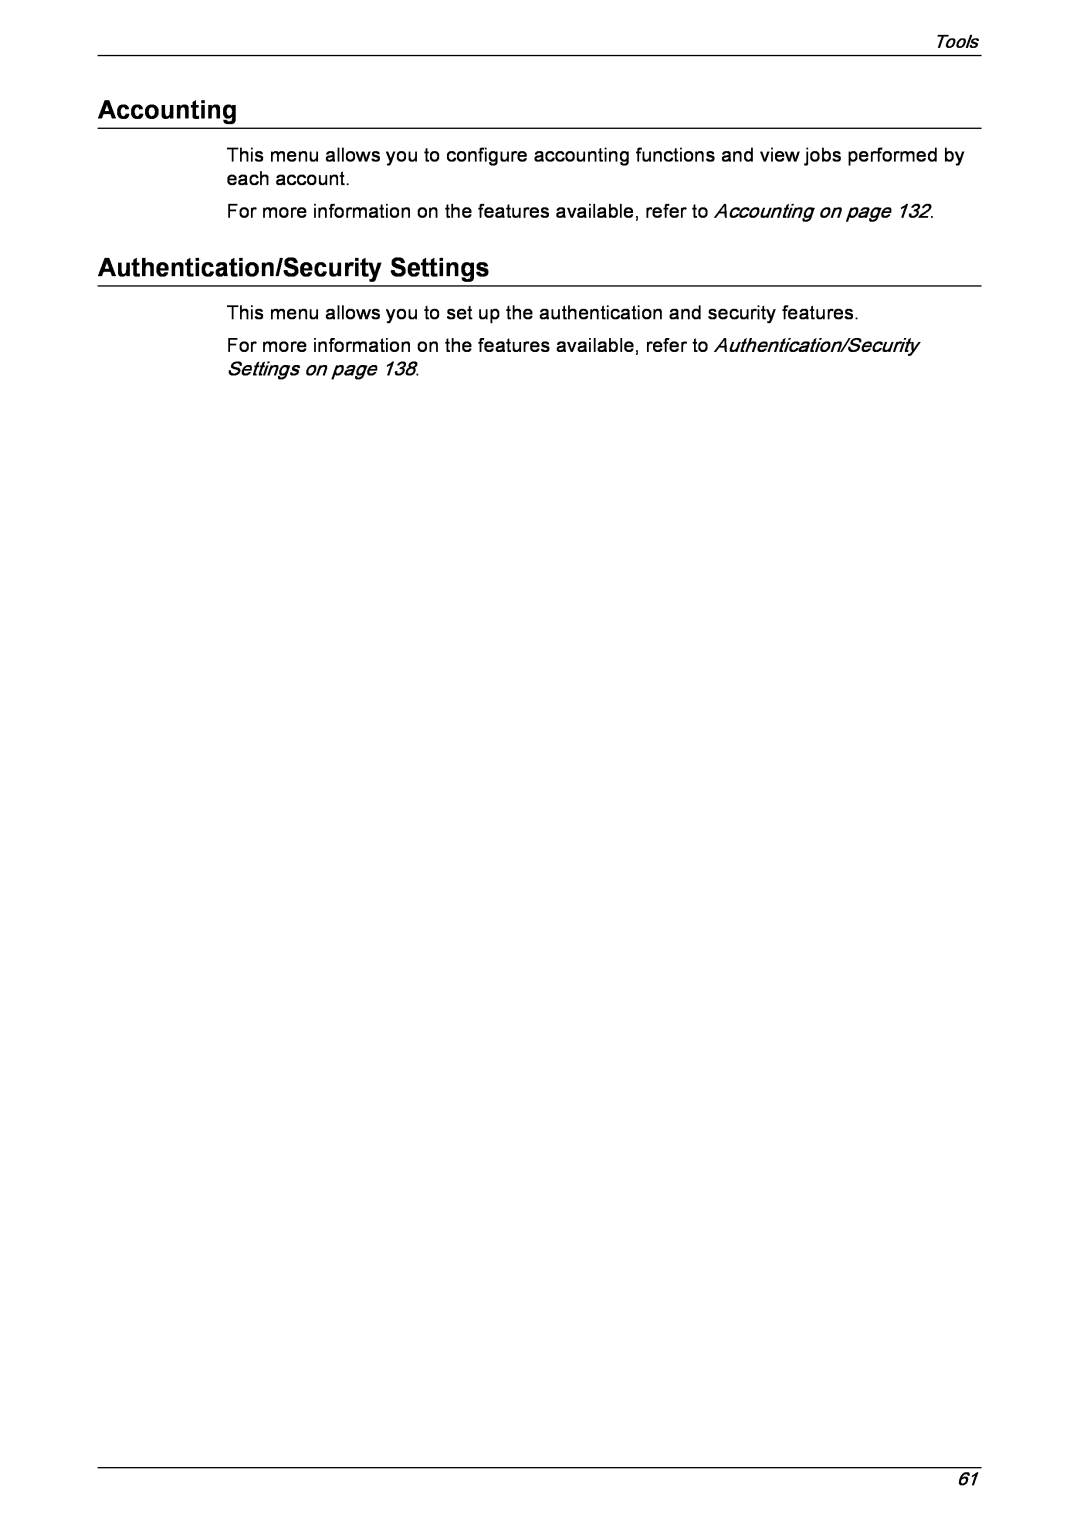 Xerox 5222 manual Accounting, Authentication/Security Settings, Tools 